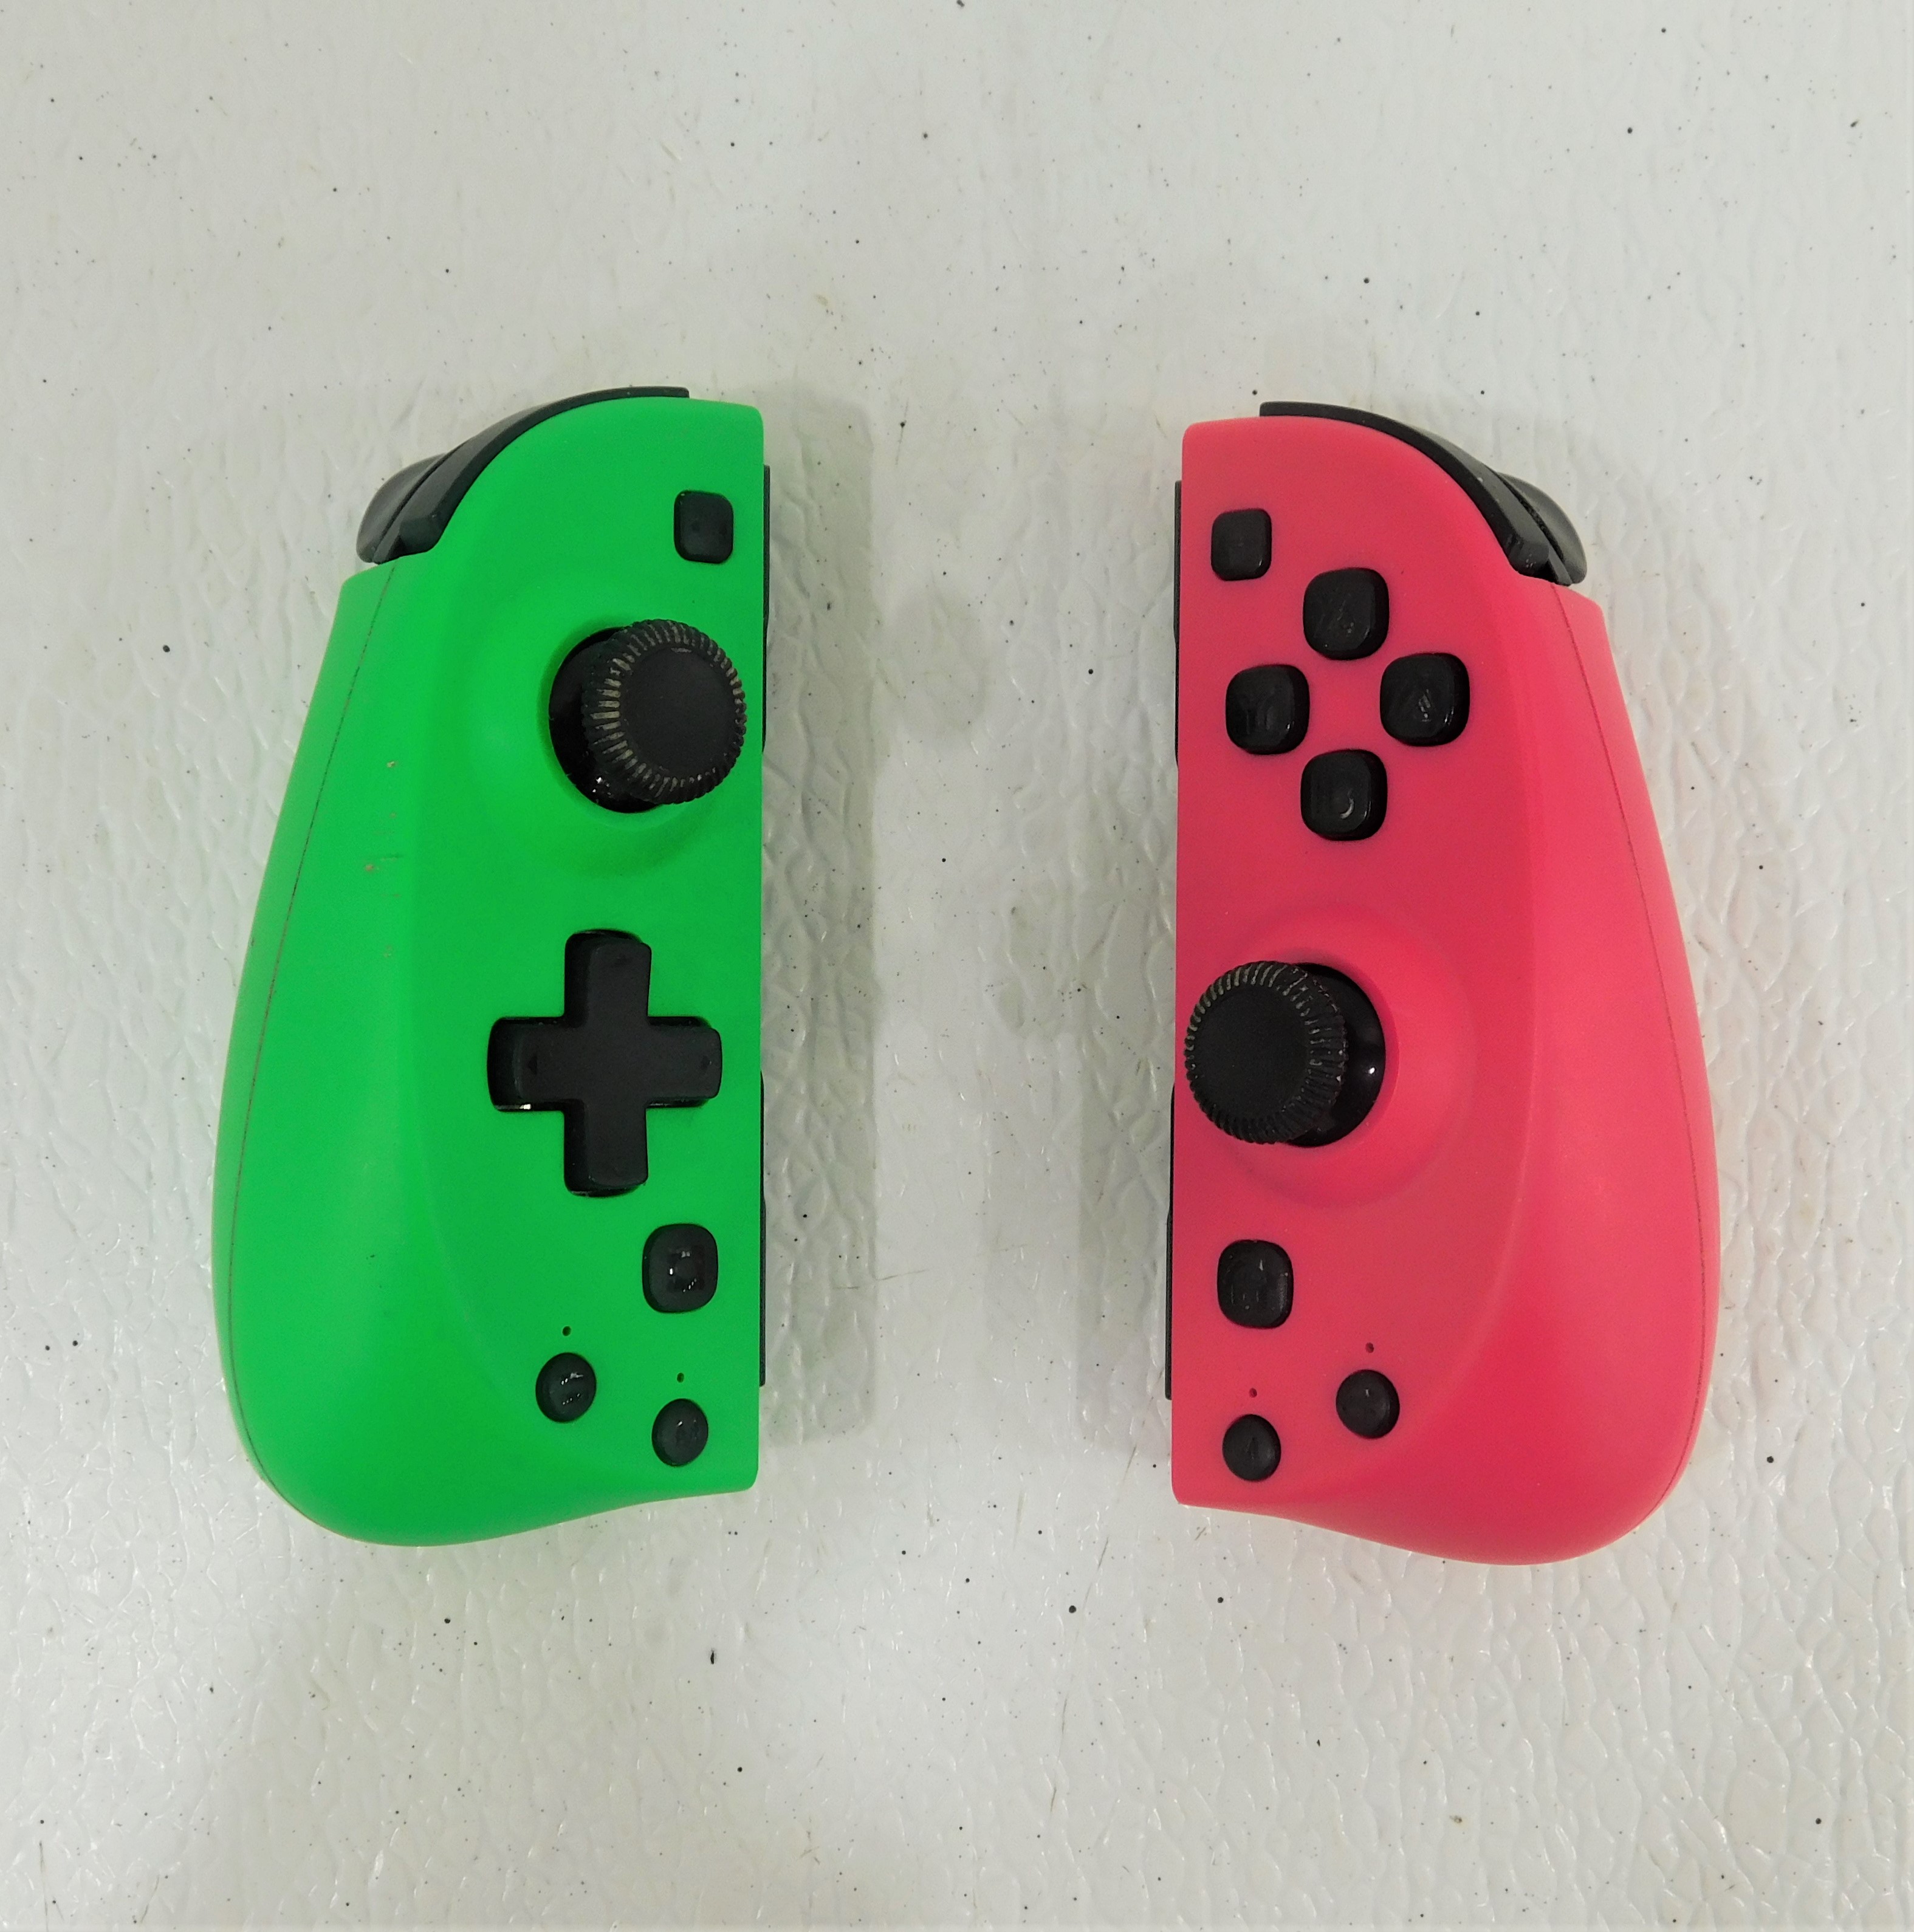 Buy the Nintendo Switch Pair of Joy-Con Controlers | GoodwillFinds